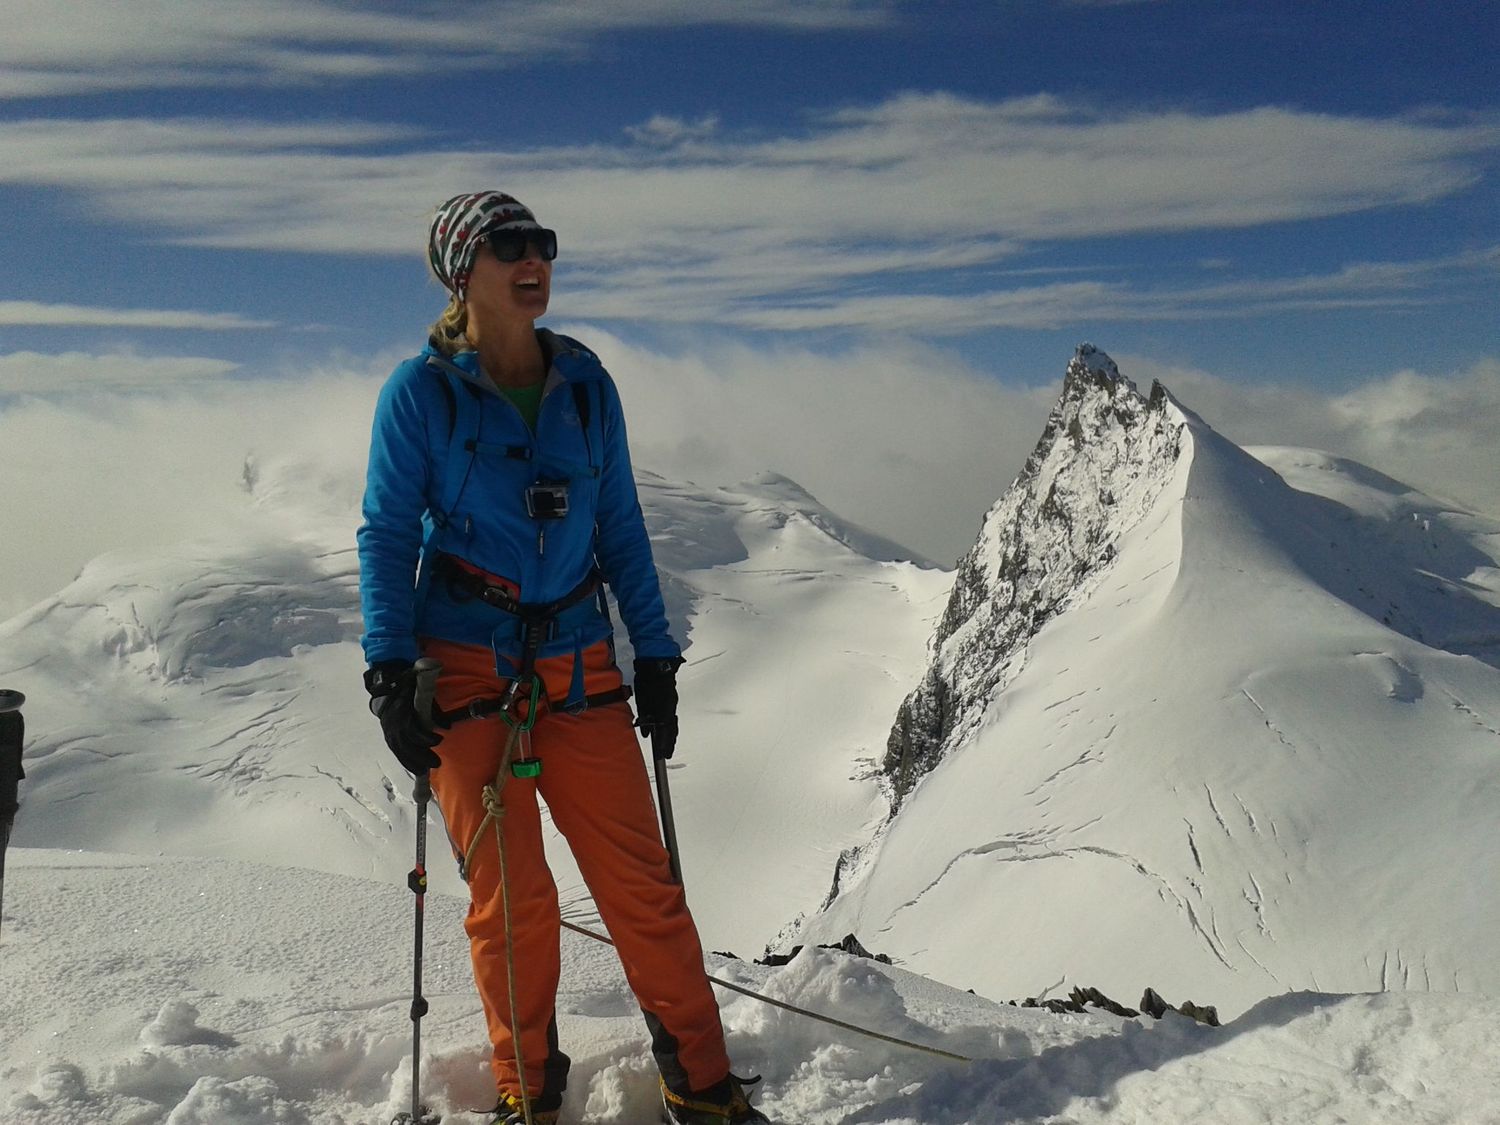  On the summit of the Allalinhorn with the Rimpfischhorn and the Strahlhorn behind 